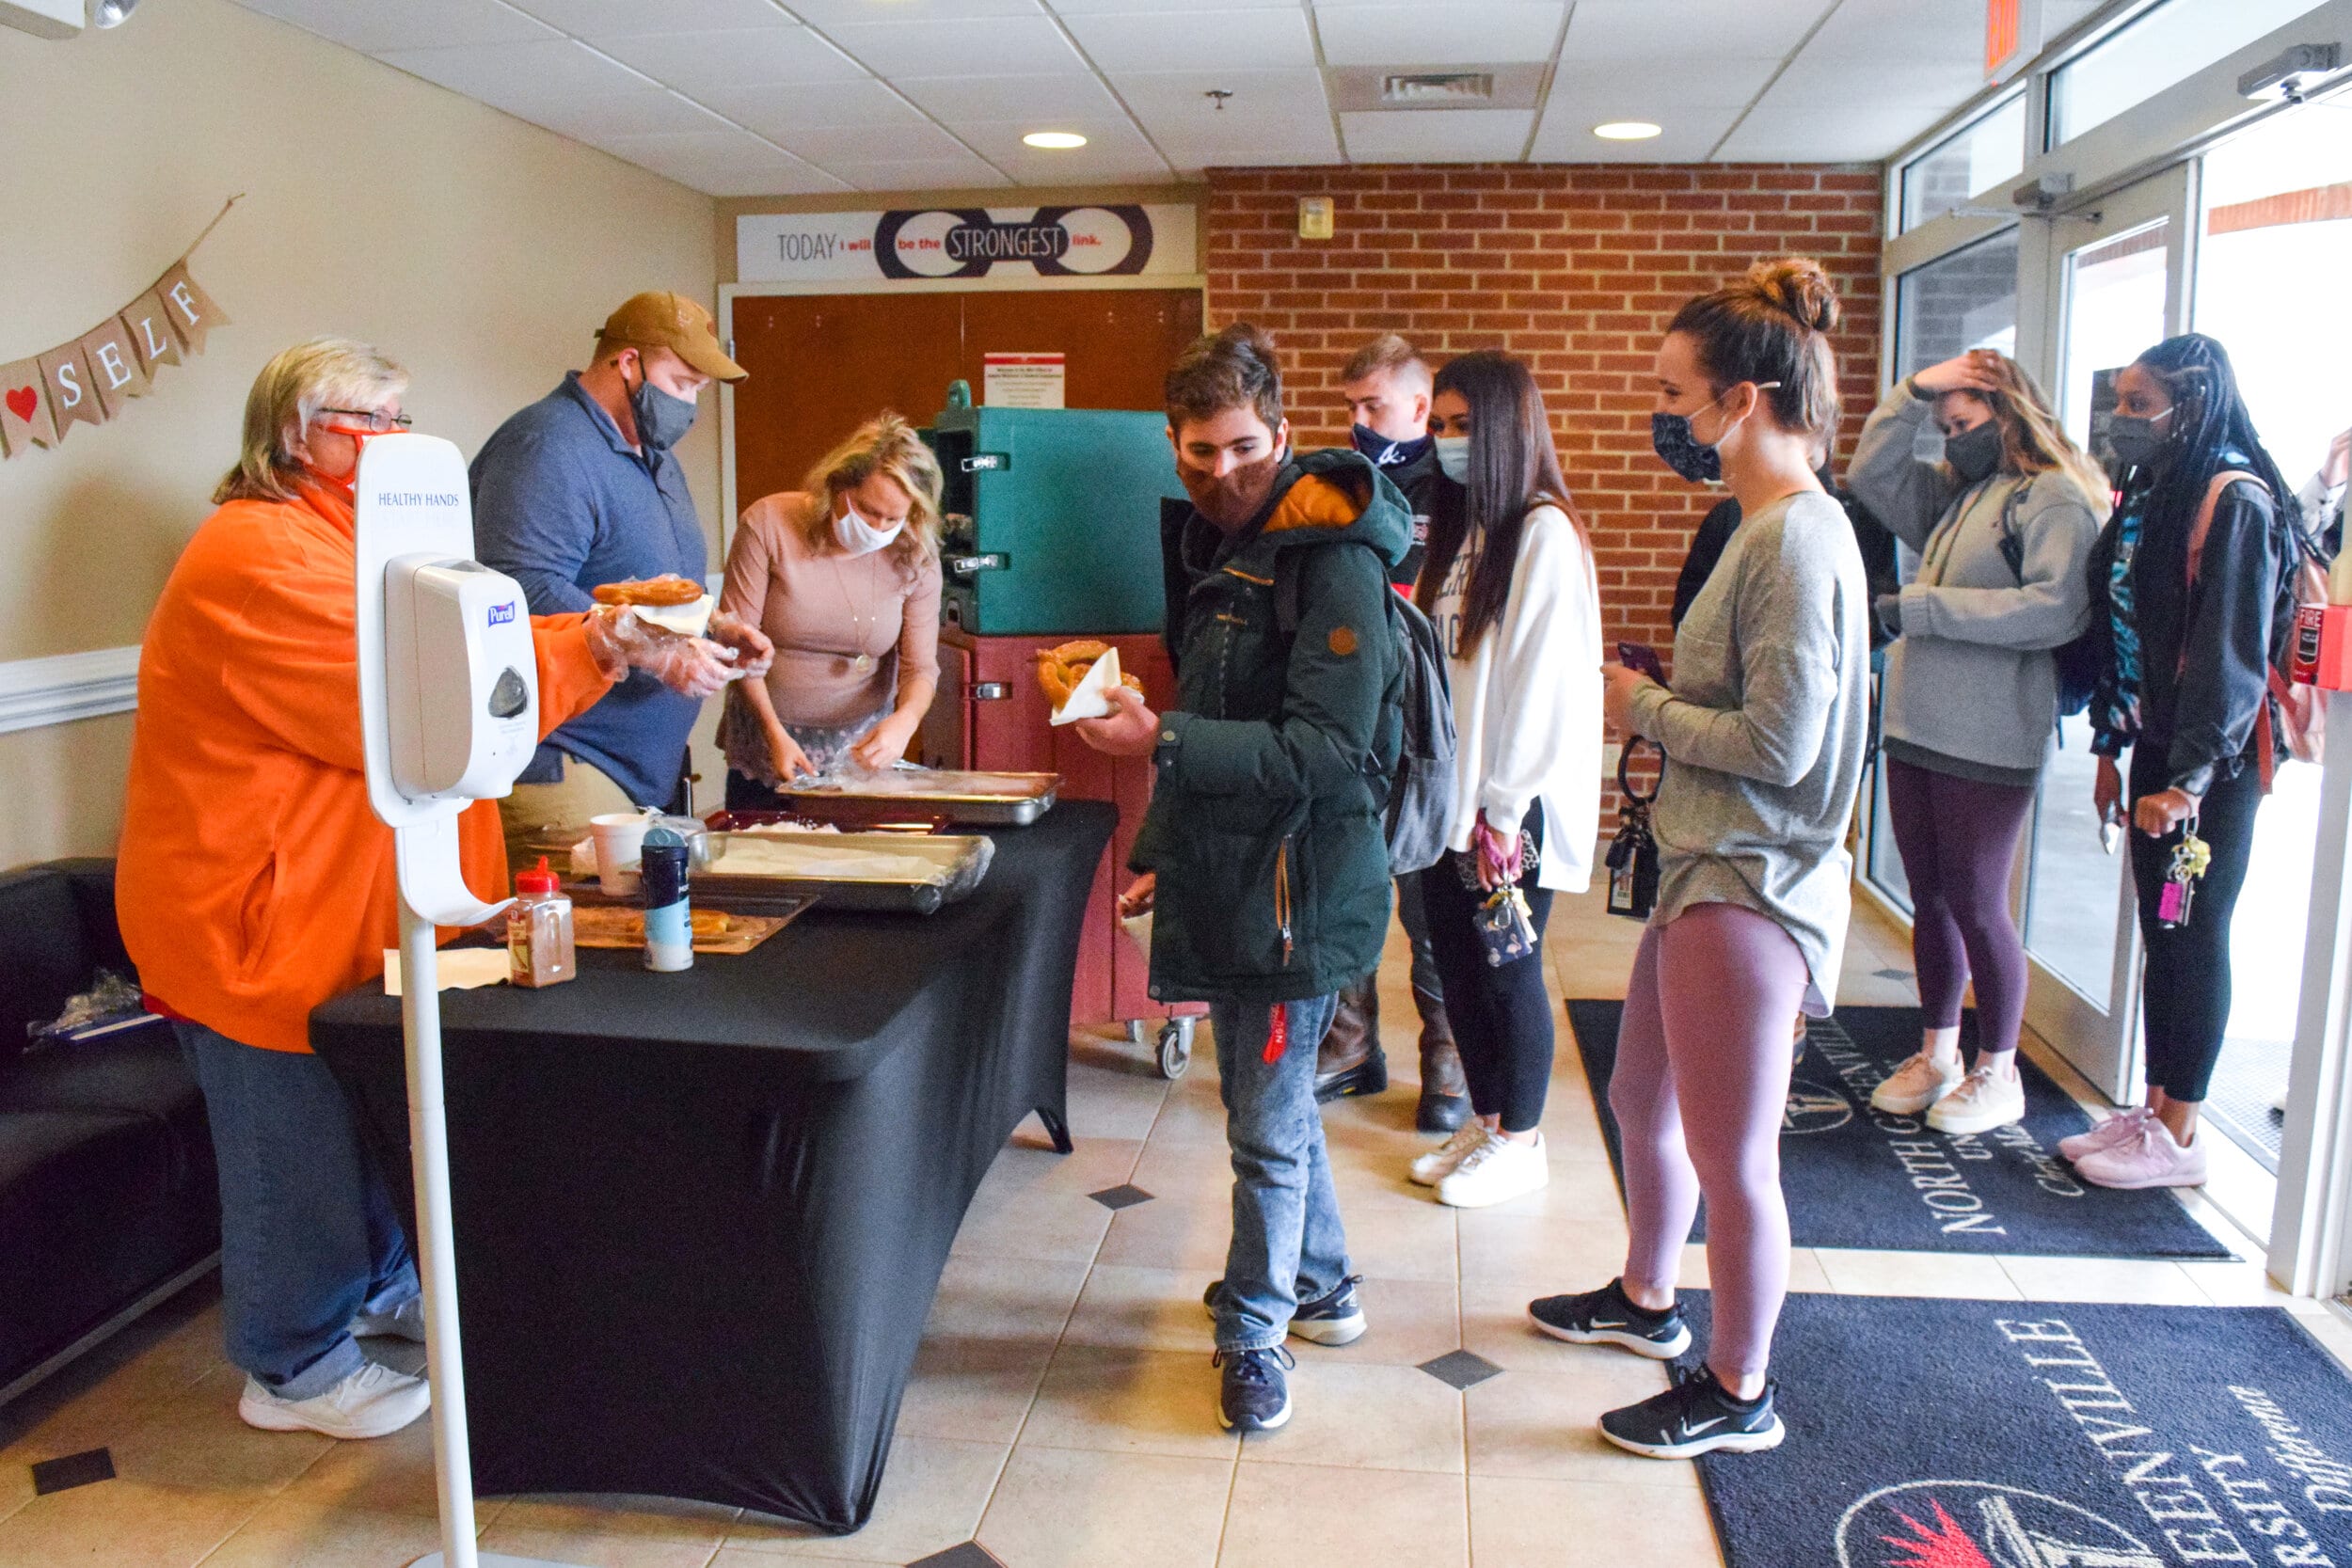 Members of Student Life hand out pretzels to NGU students.